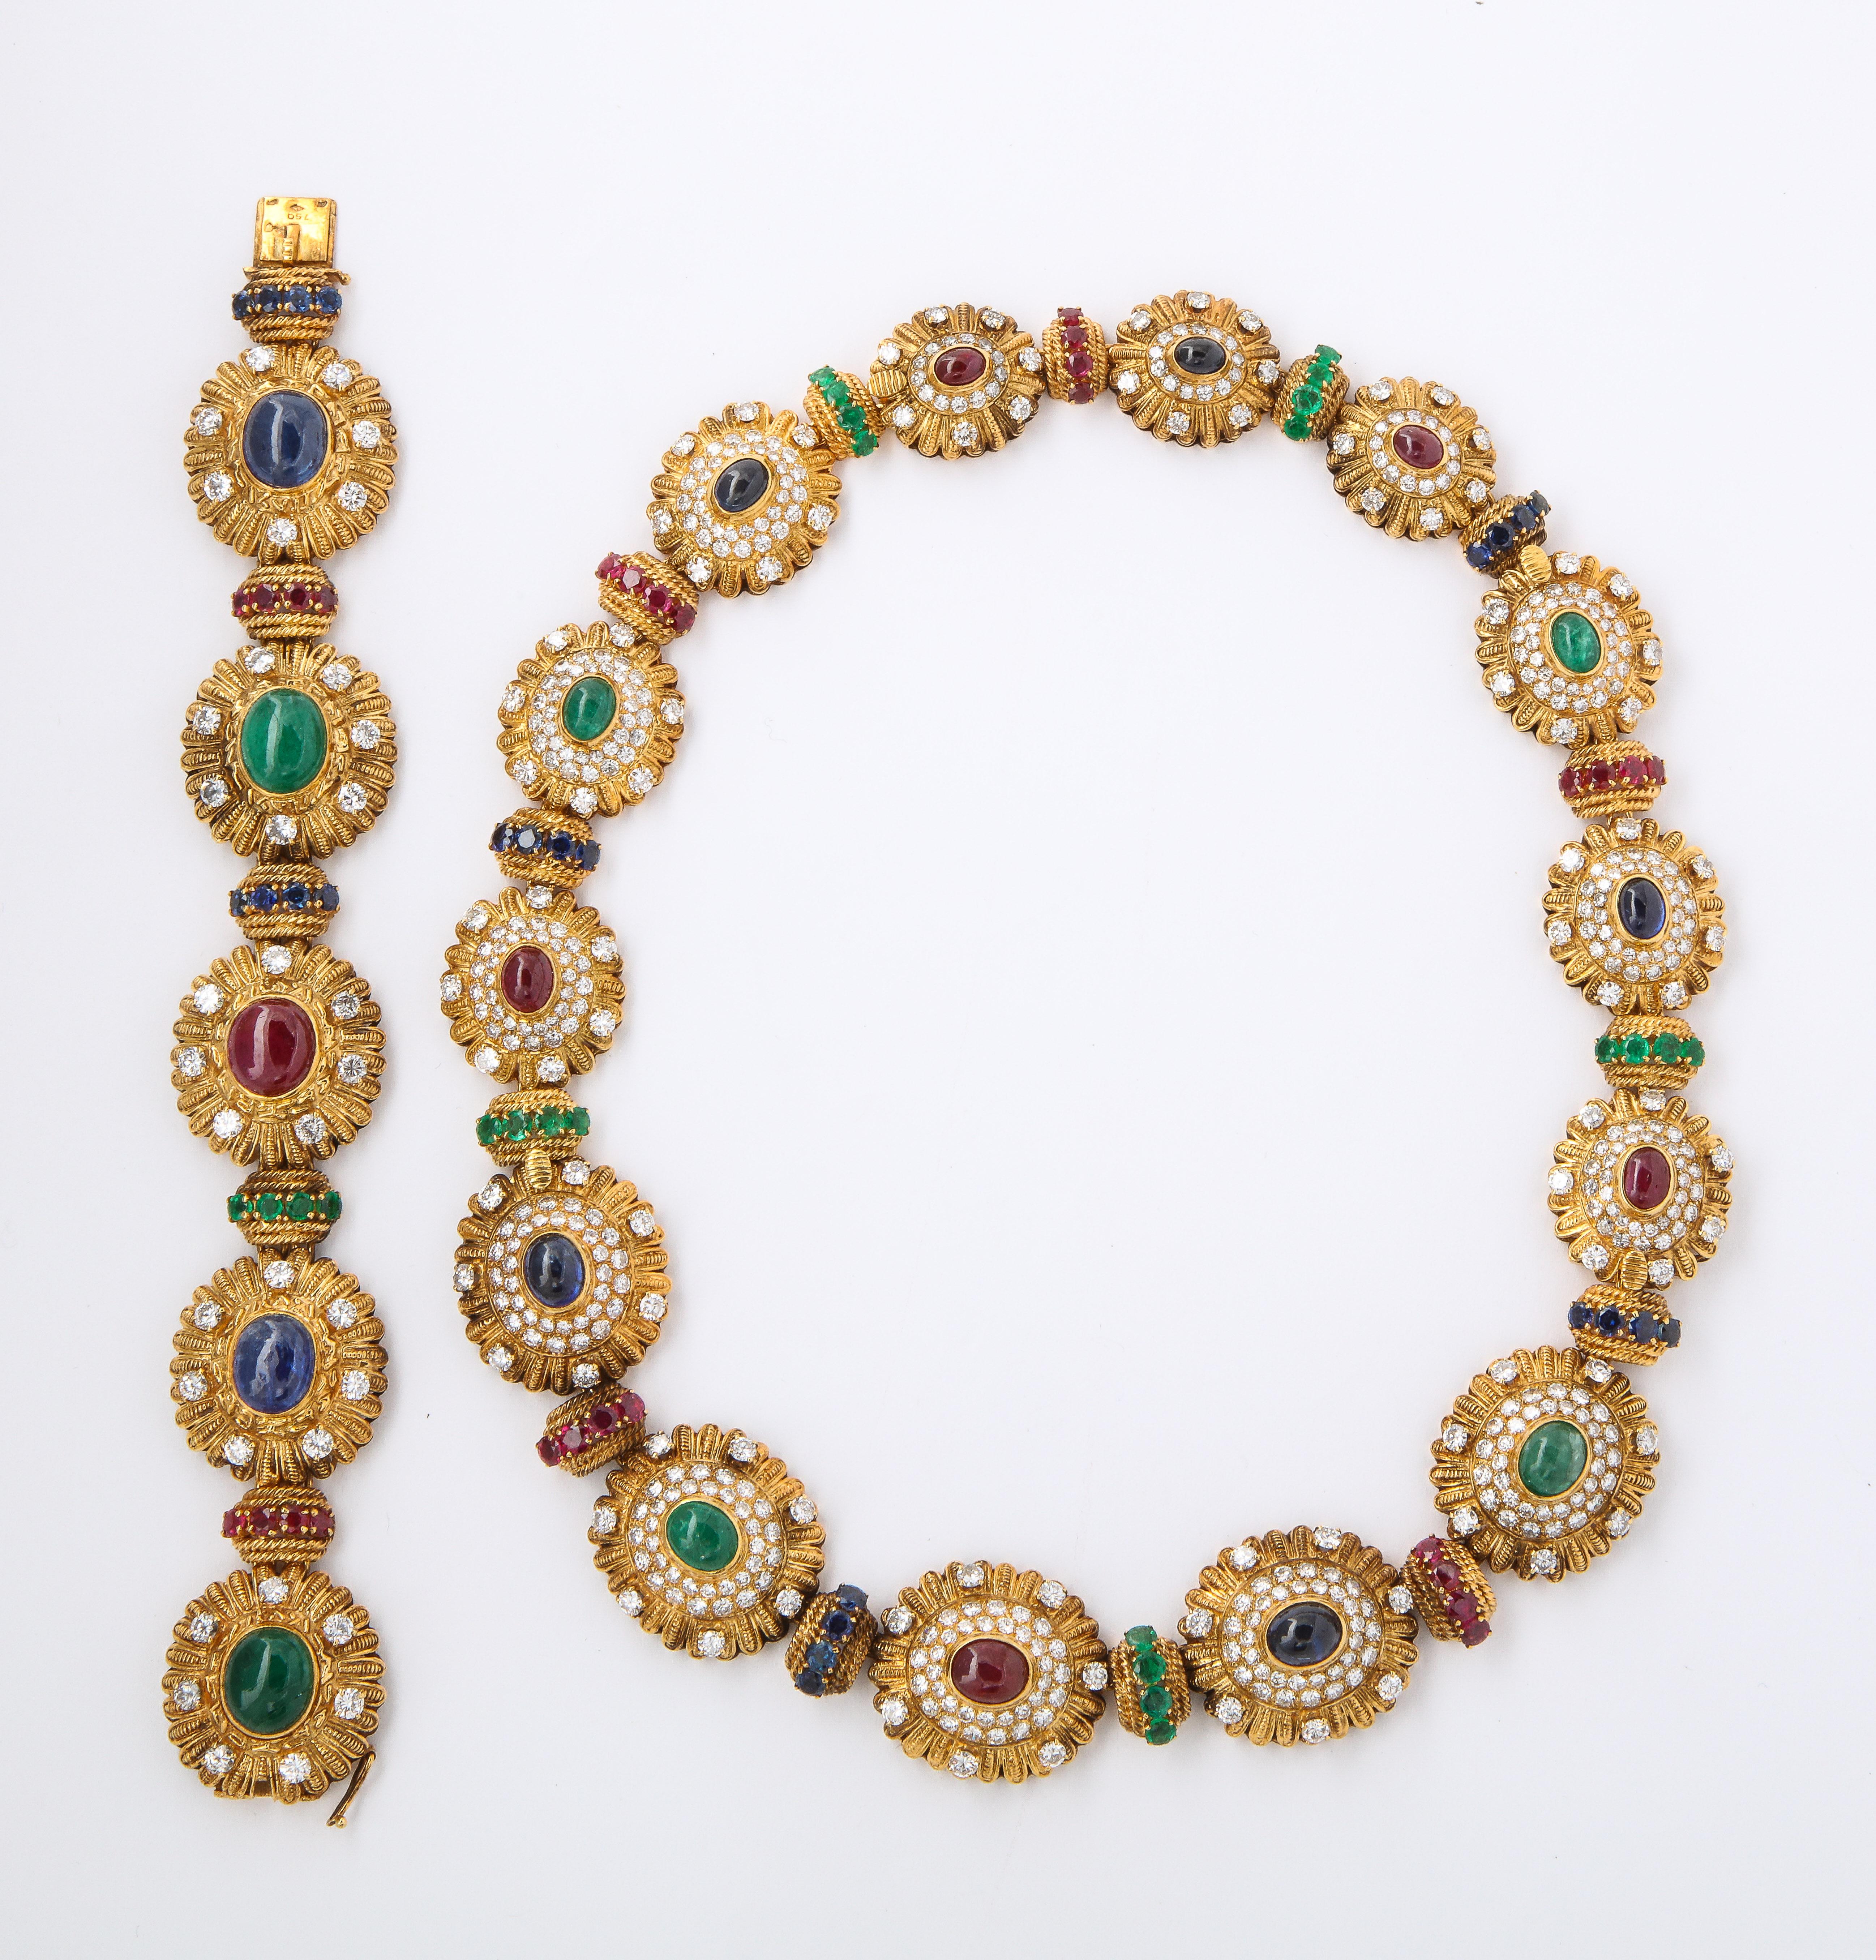 Van Cleef & Arpels Multi Gem & Diamond Necklace & Bracelet Set, made in France Cicra 1965
This extremely Beautiful multi gem ruby, sapphire & emerald set made by Van Cleef & Arpels is from the royal collection of  Queen Anne-Marie of Greece. Wear it